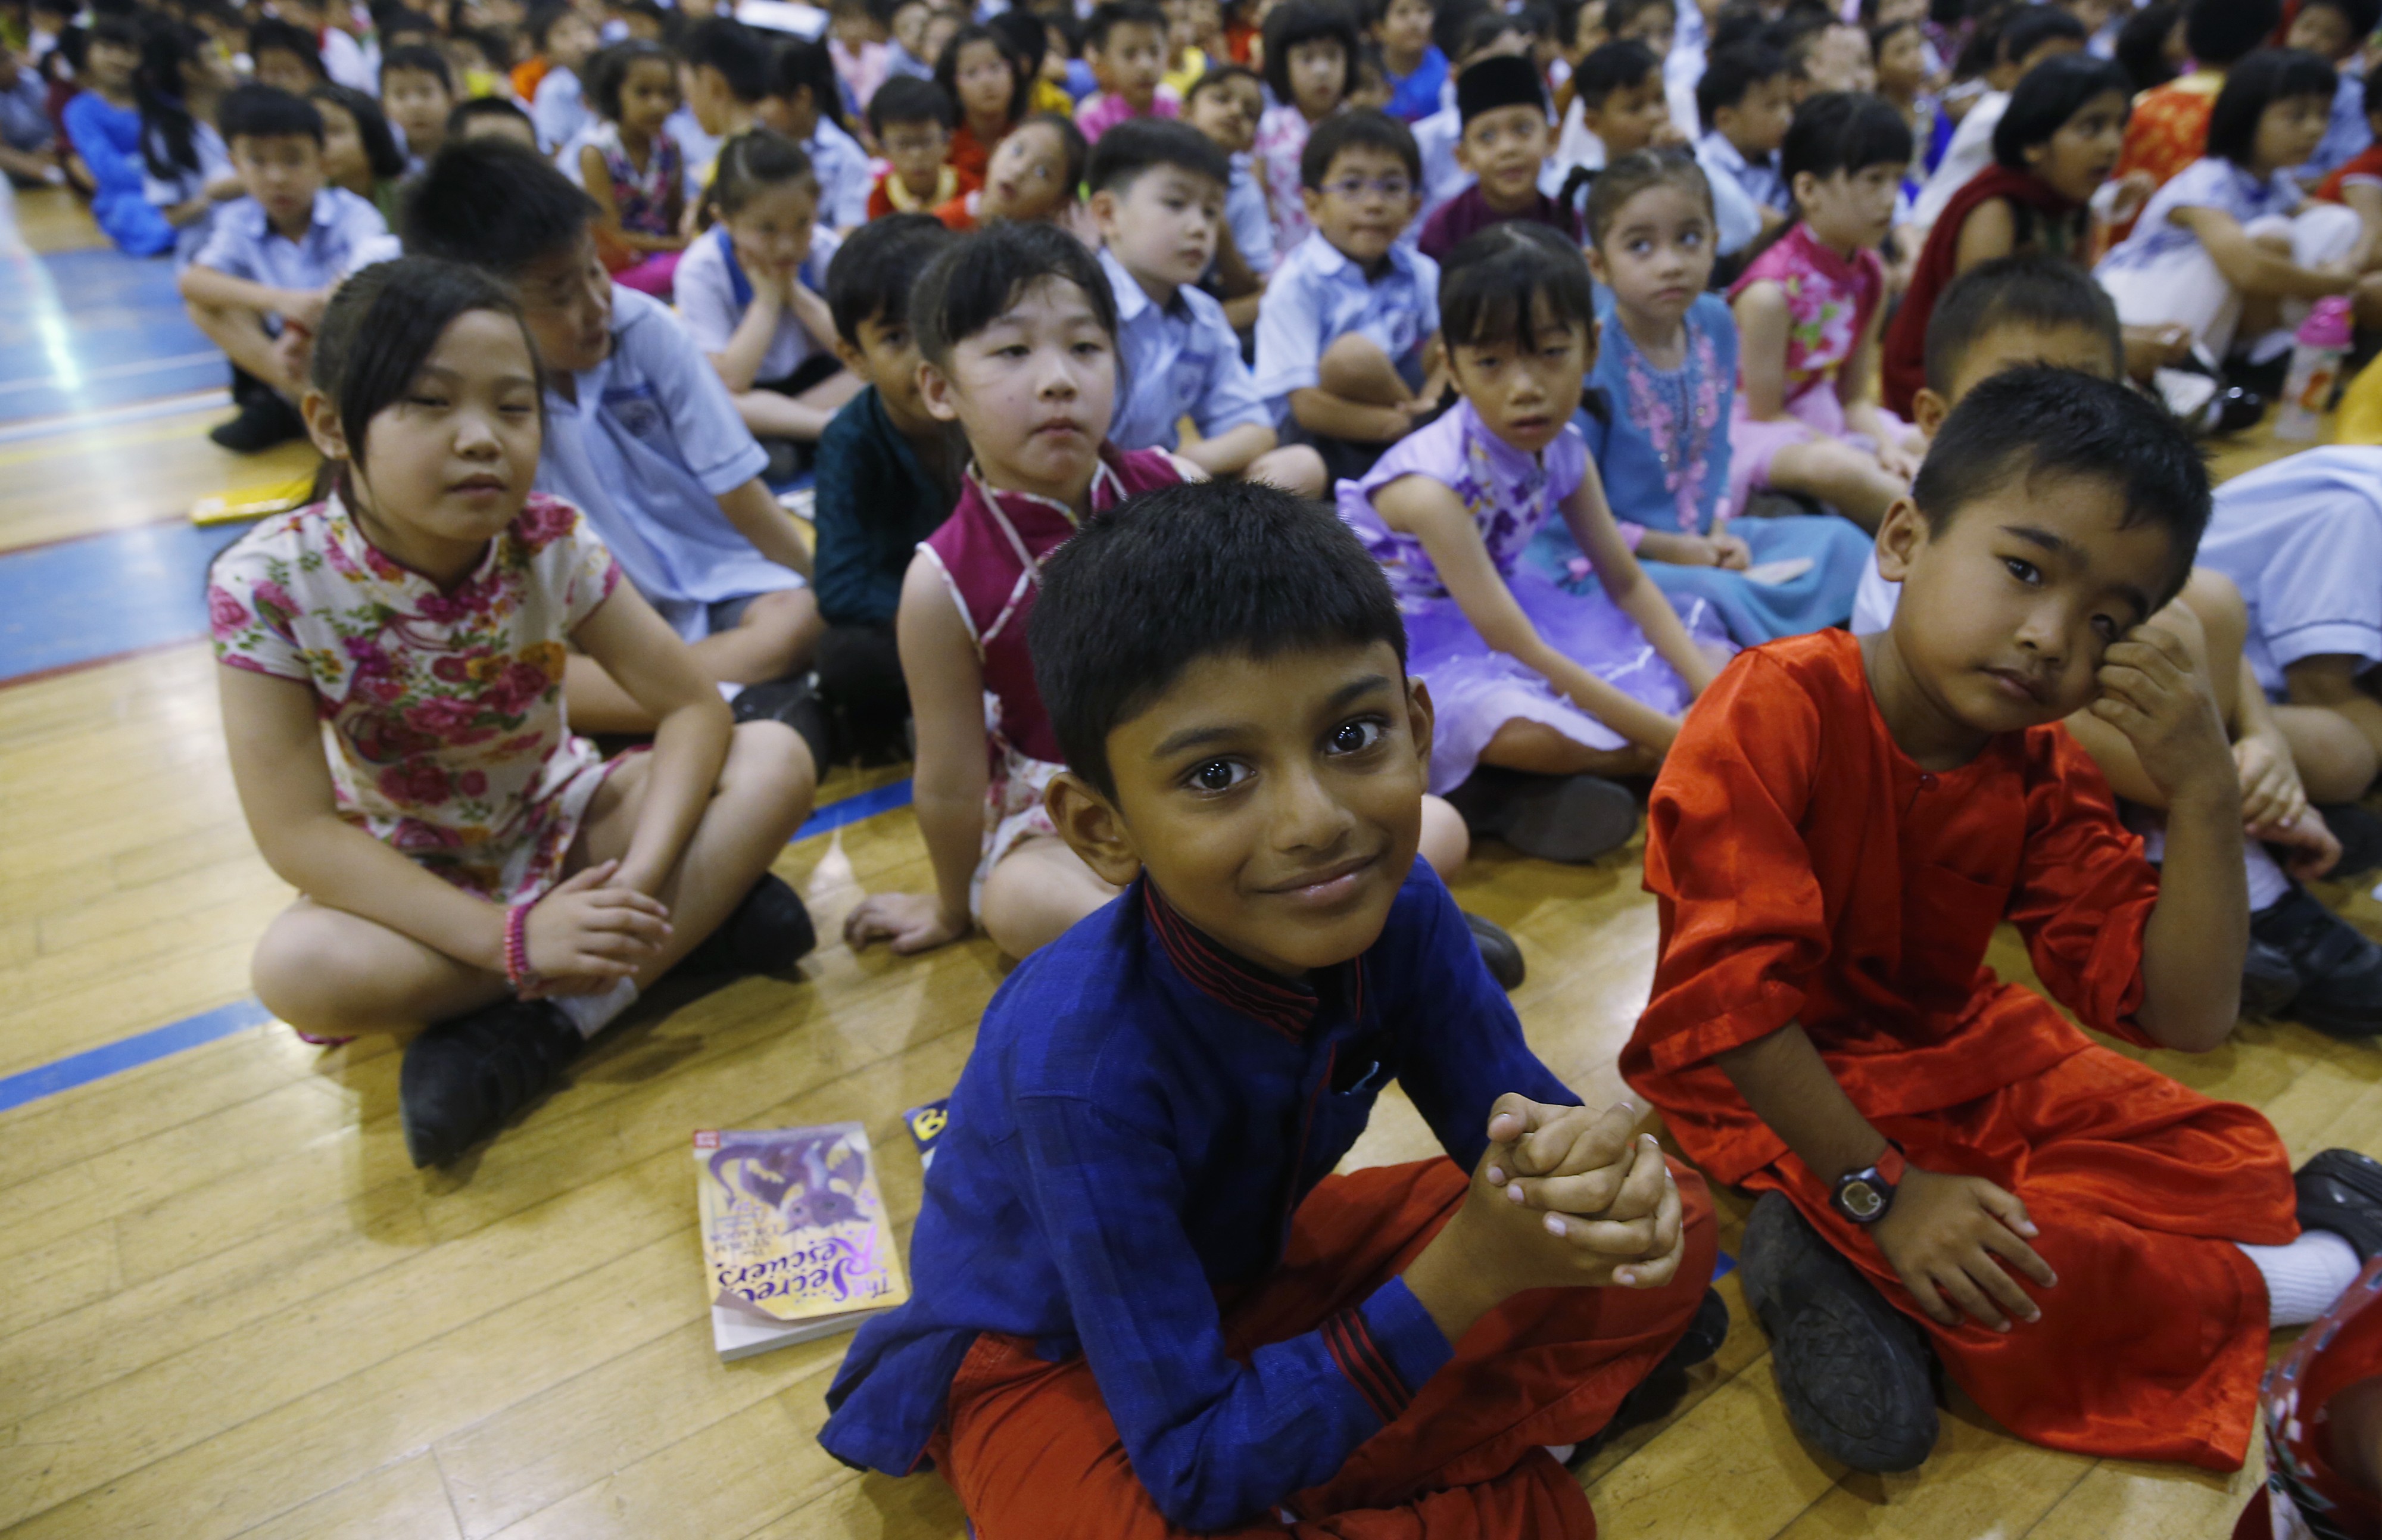 Through measures like annual Racial Harmony Day celebrations in schools, Singapore is careful to promote peace between ethnic groups. Photo: Kevin Lim